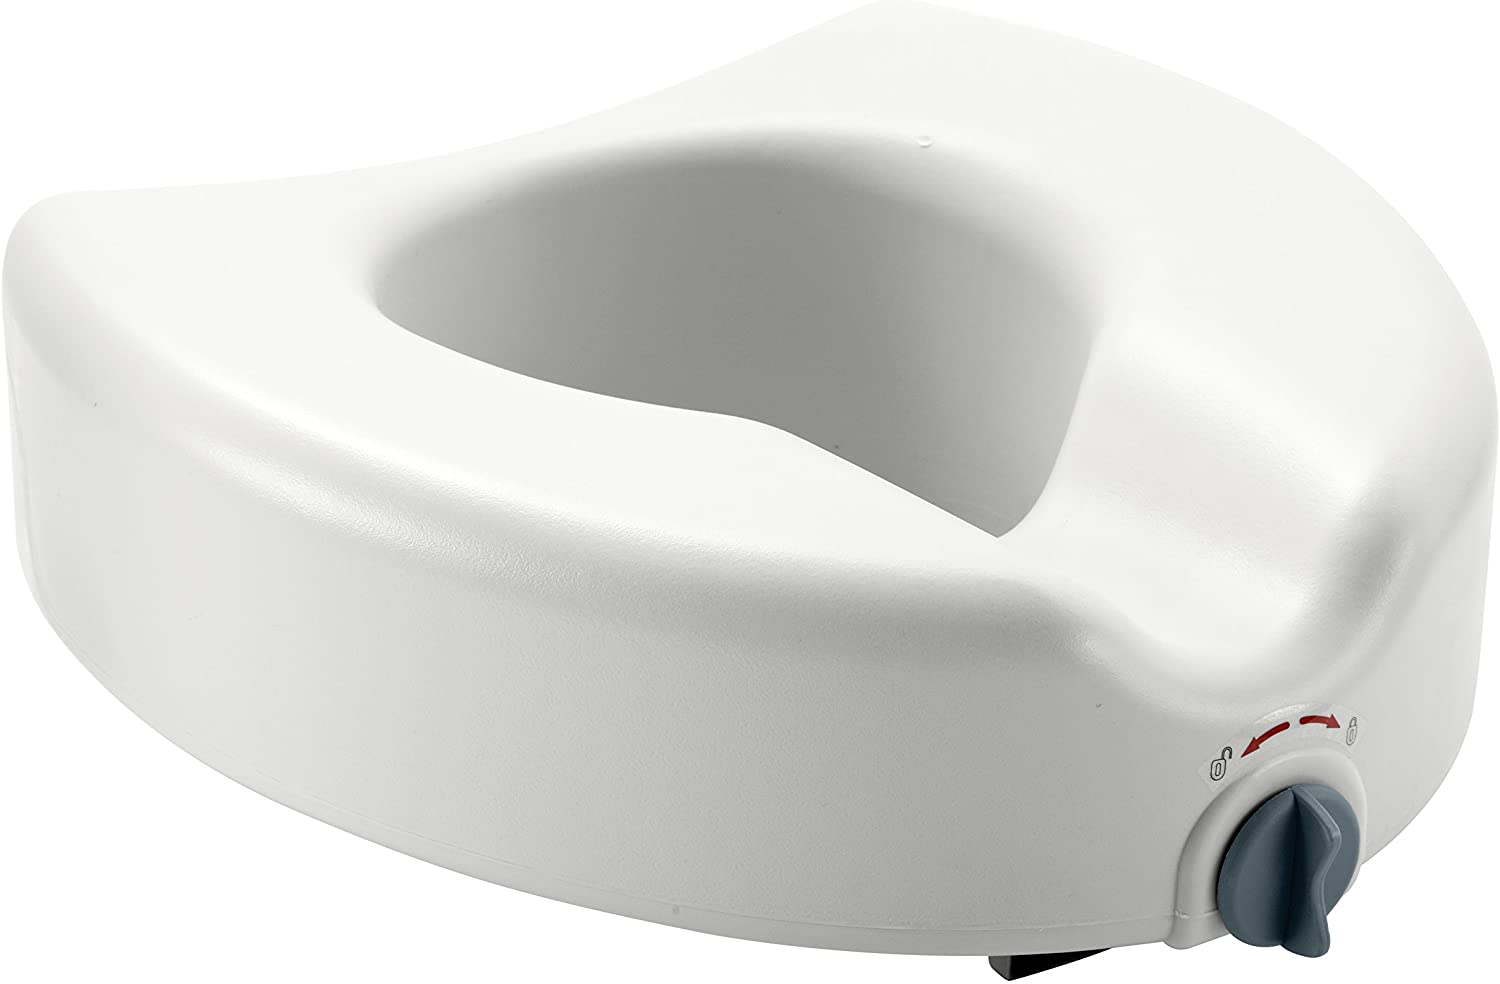 Durable Medical Equipment Raised Toilet Seat (weight capacity up to 300lbs)